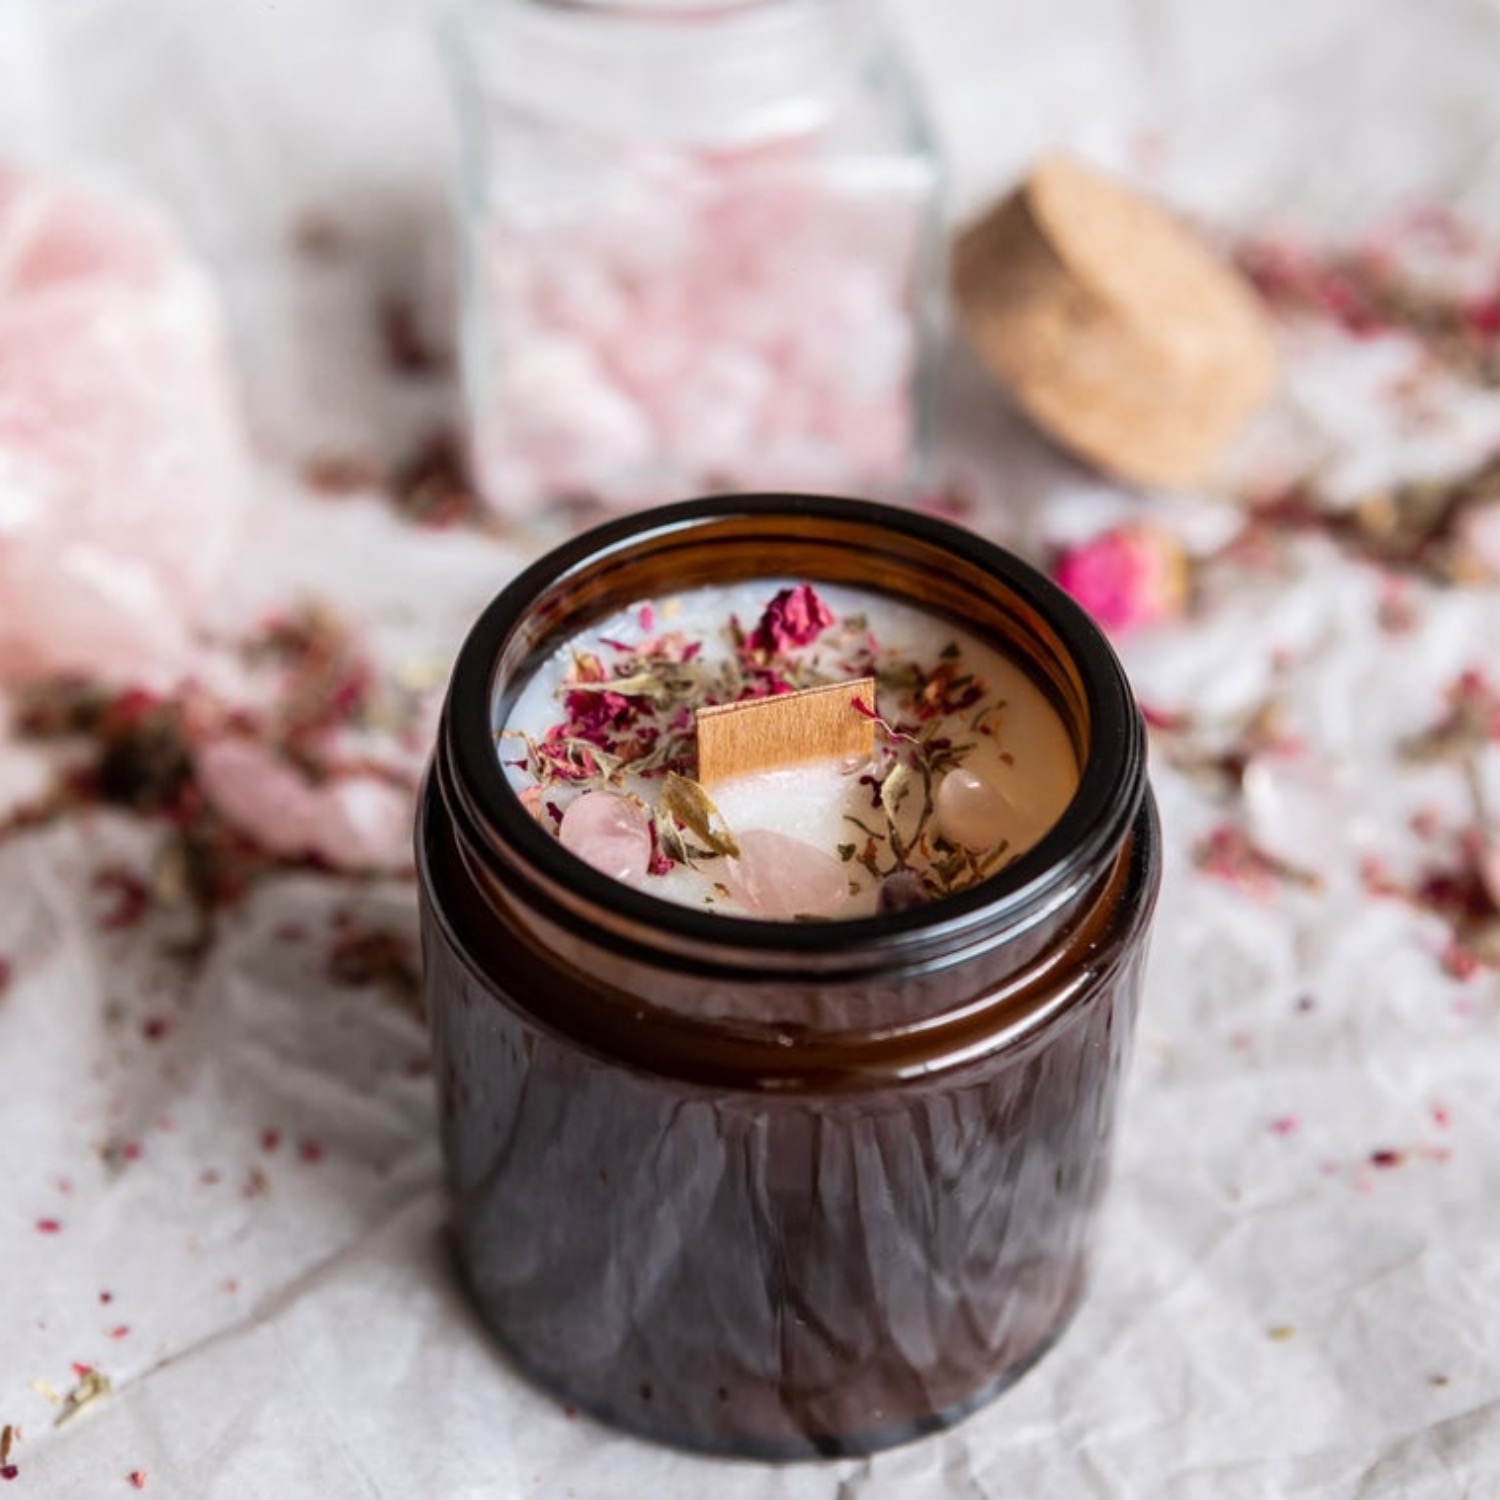 D.I.Y. Wooden Wick Candles — Wine & Sprinkles